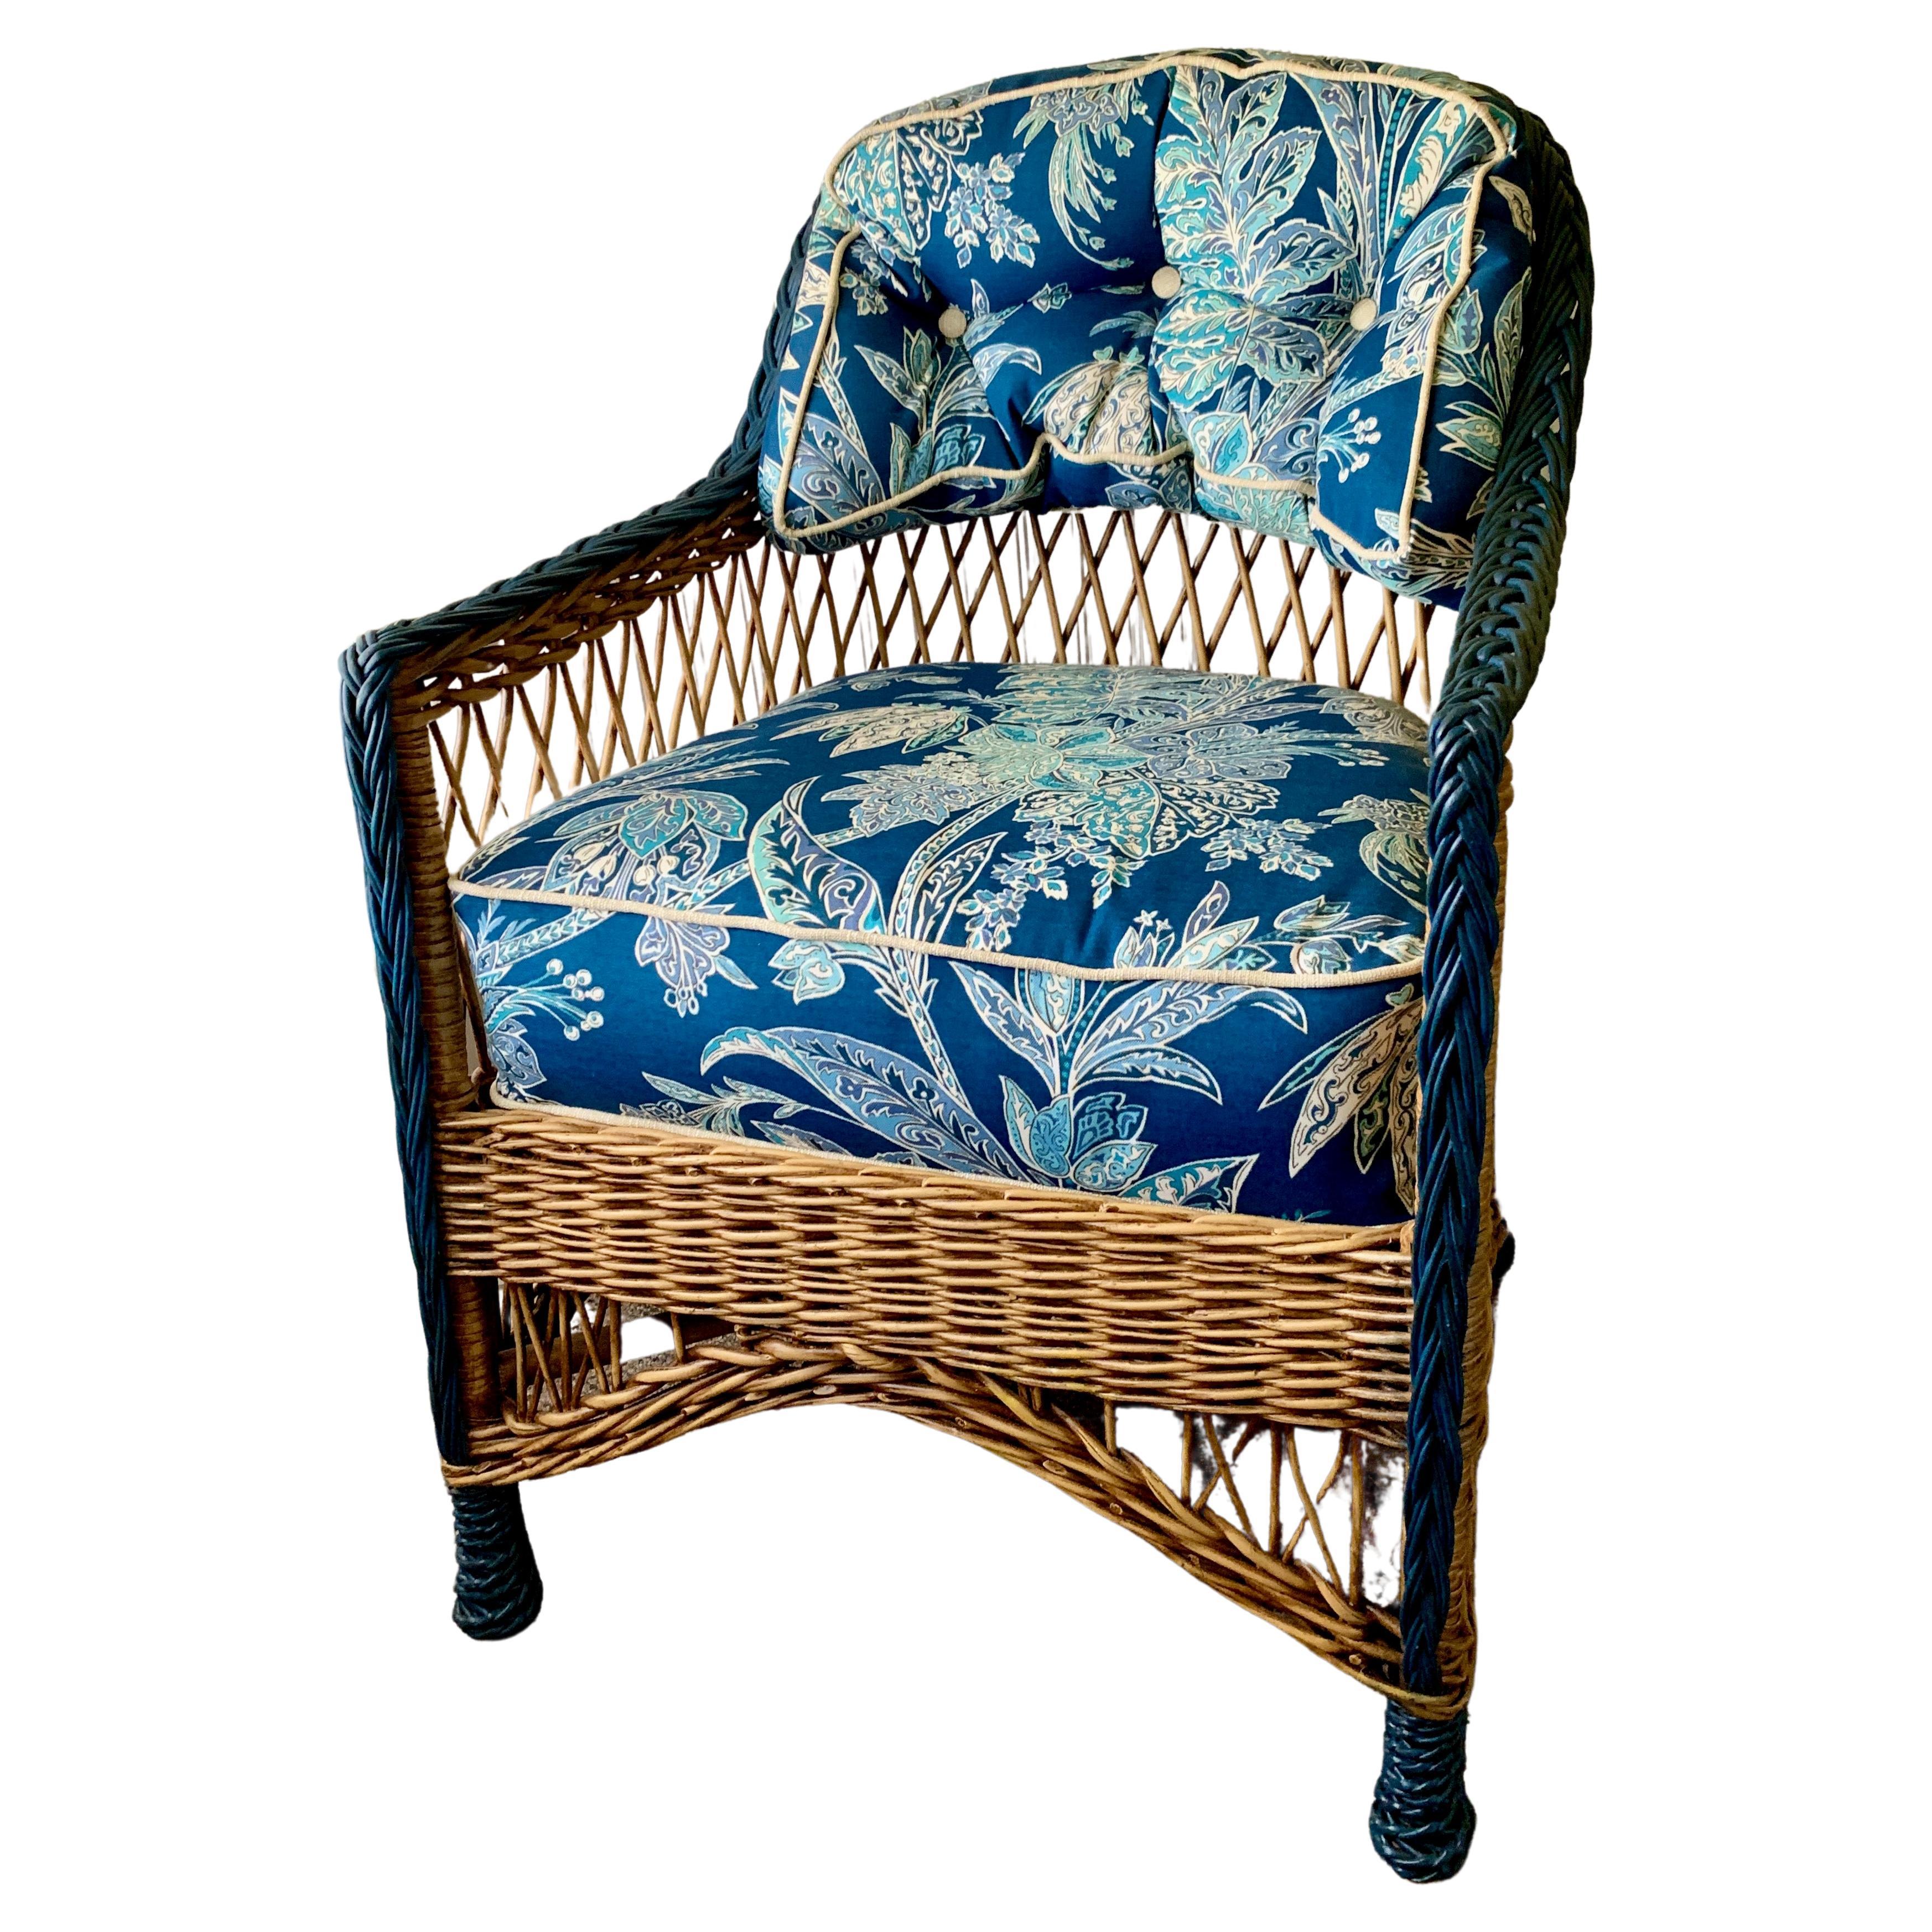 A beautiful small scale Bar Harbor style wicker arm chair in a natural finish with blue accent trim. This is a very comfortable and sturdy all woven arm chair made most likely in Gardner Massachusetts in the very early 20th C. Bar Harbor style